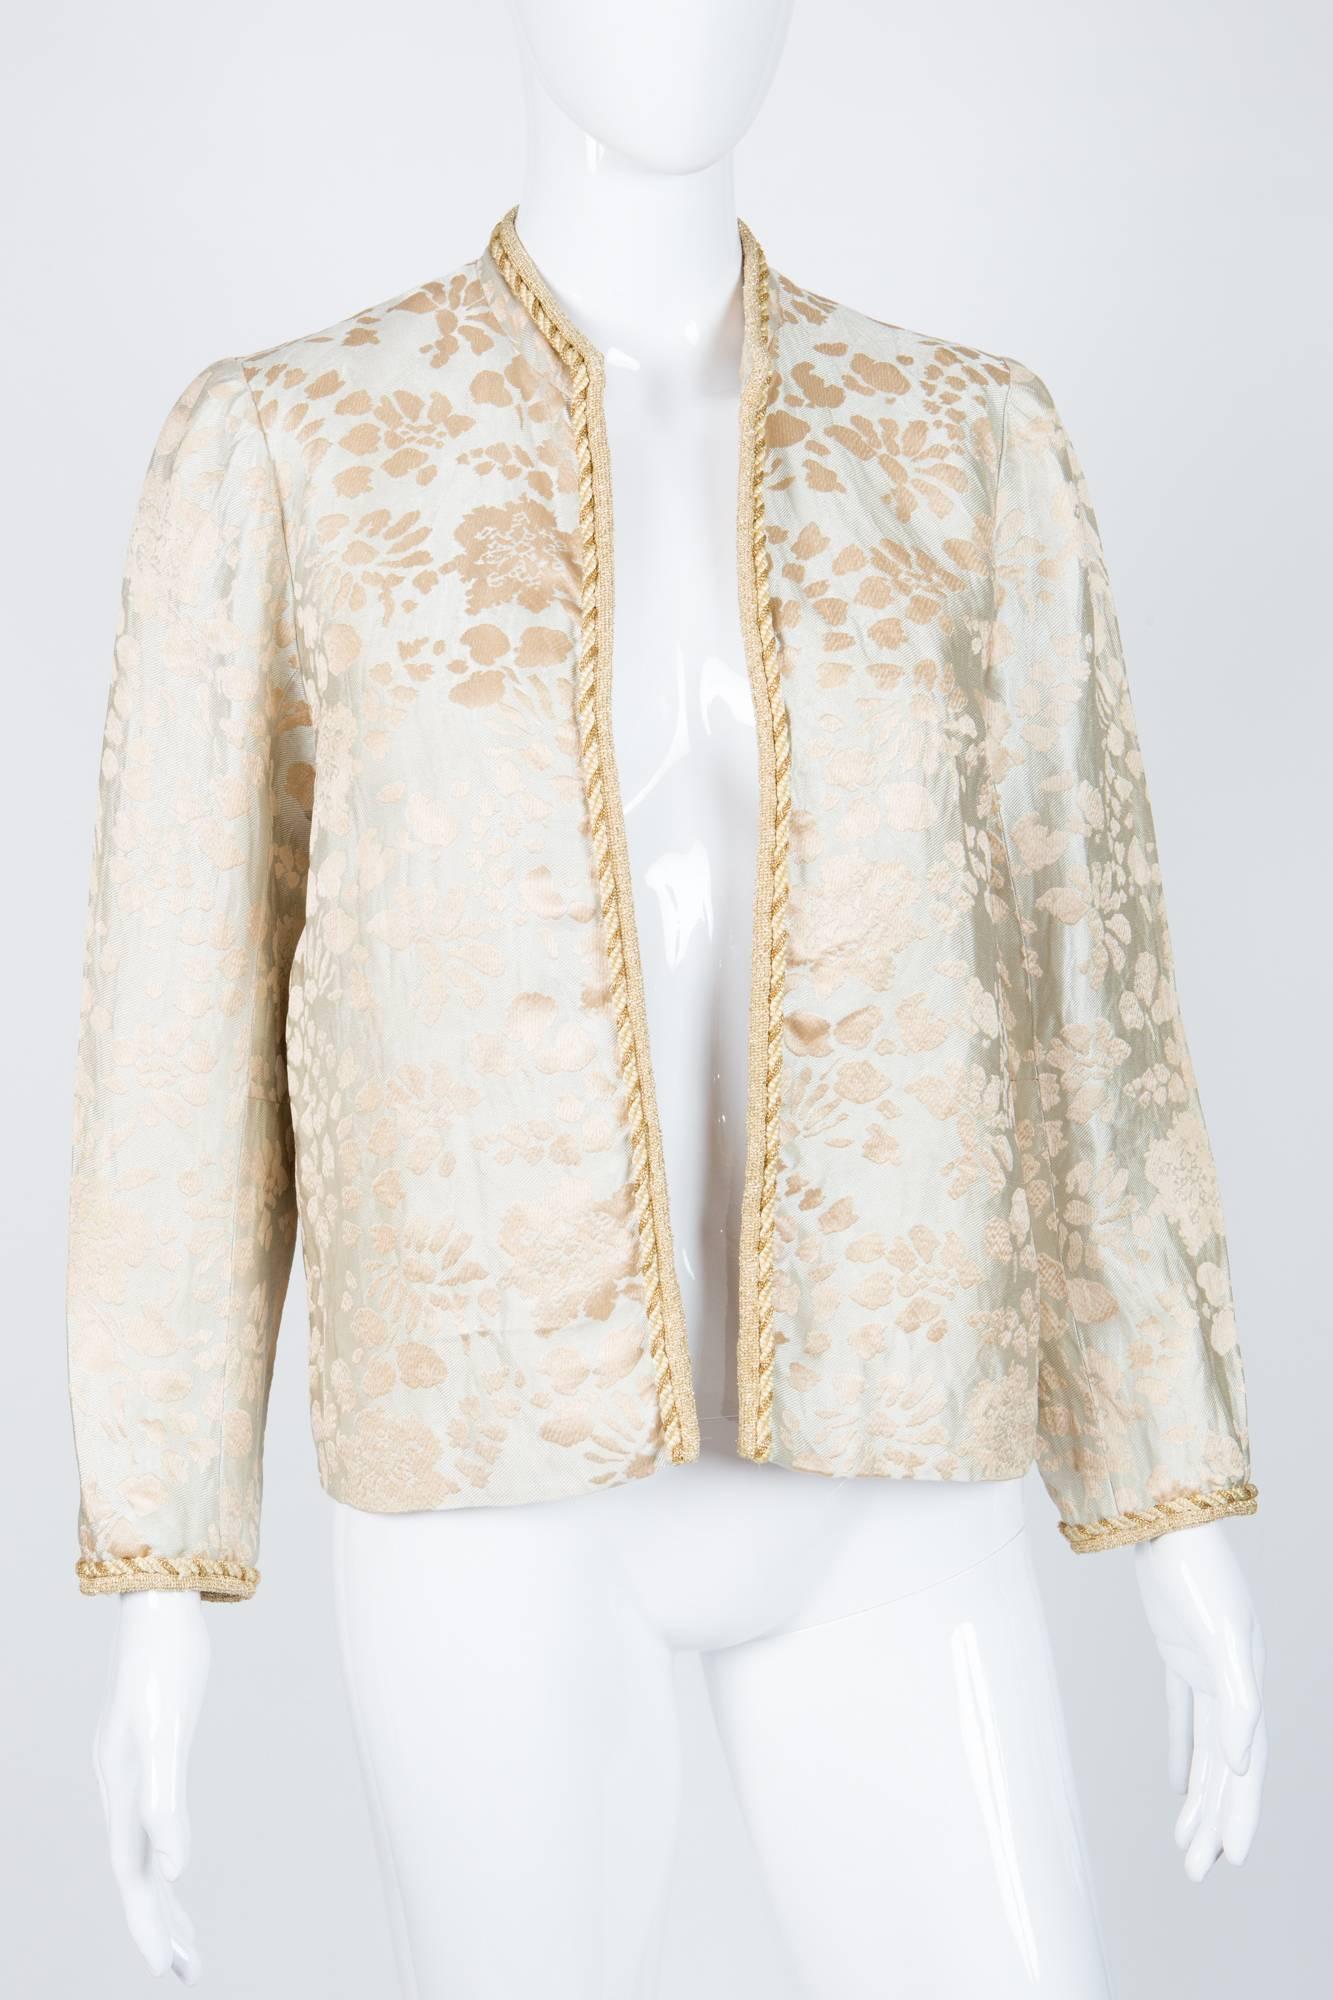 1960s Gold and ivory Carven evening jacket featuring a jacquard motive, ribbon with lurex finishing, a edge toed opening, a camel silk lining.
In good vintage condition. Made in France.
Estimated size 36fr/ US4/ UK8
We guarantee you will receive